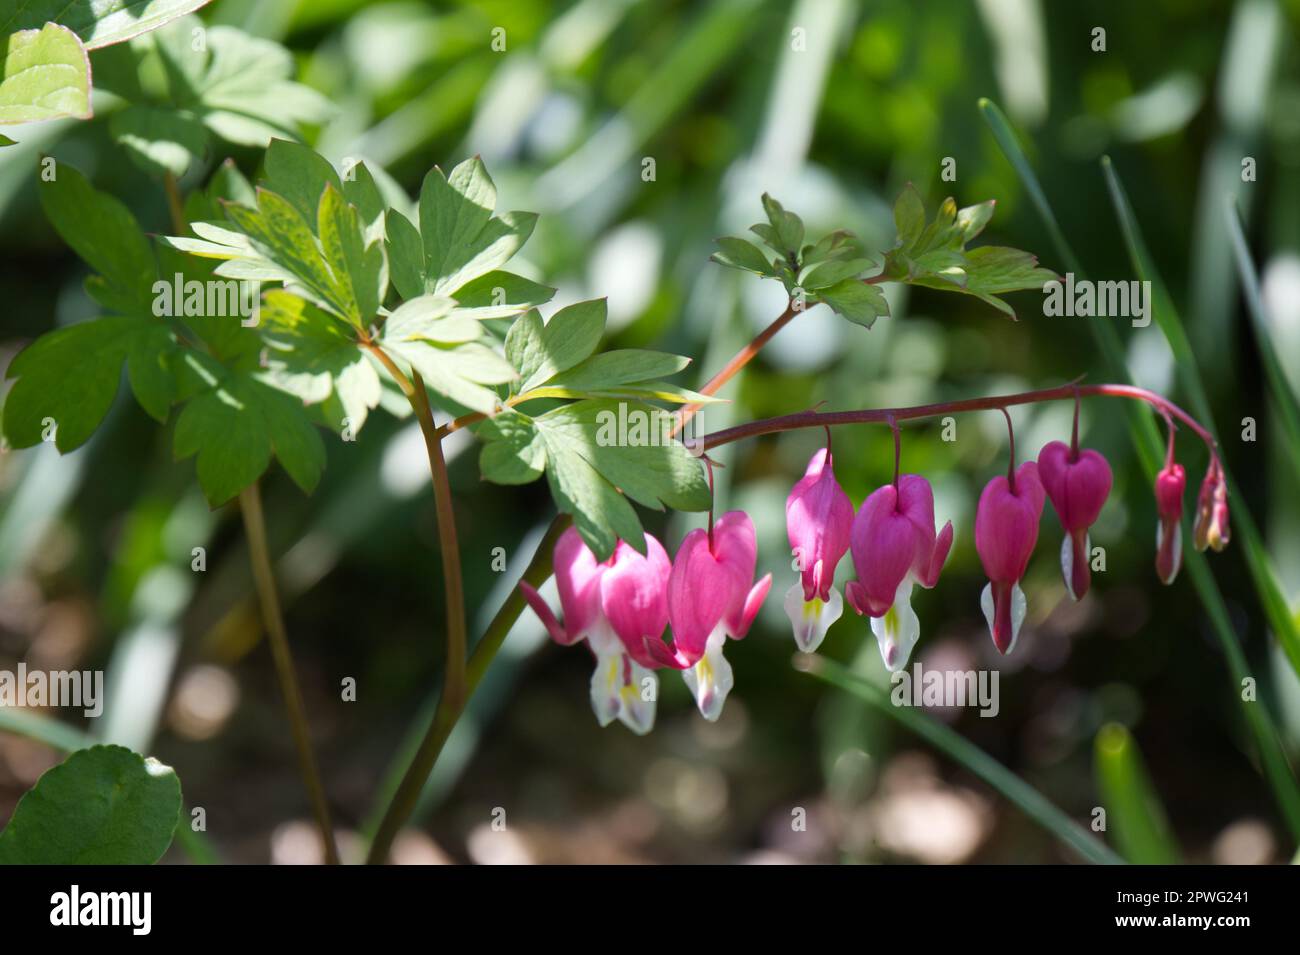 Elegant pink and white flowers of Dicentra spectabilis, also known as Lamprocapnos spectabilis or Bleeding Heart, in UK garden April Stock Photo